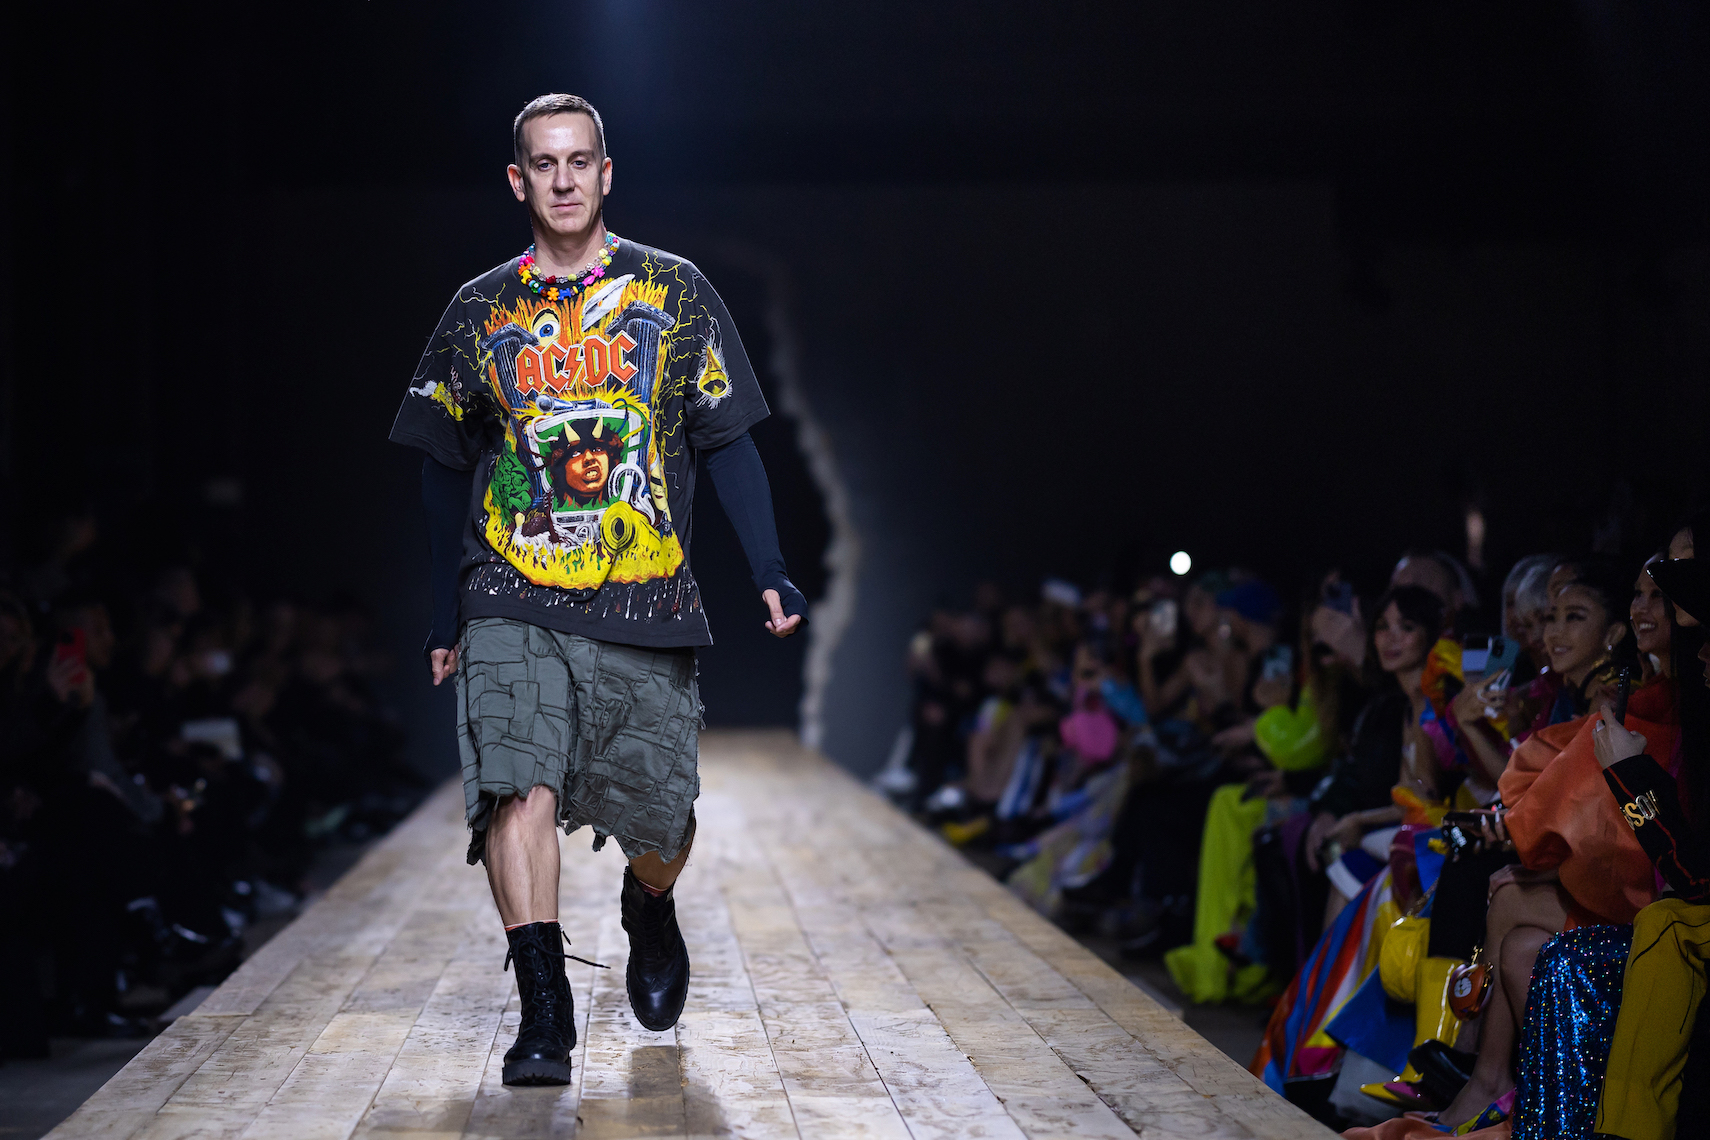  MILAN, ITALY - FEBRUARY 23: Designer Jeremy Scott walks the runway at the Moschino fashion show during the Milan Fashion Week Womenswear Fall/Winter 2023/2024 on February 23, 2023 in Milan, Italy. (Photo by Justin Shin/Getty Images)